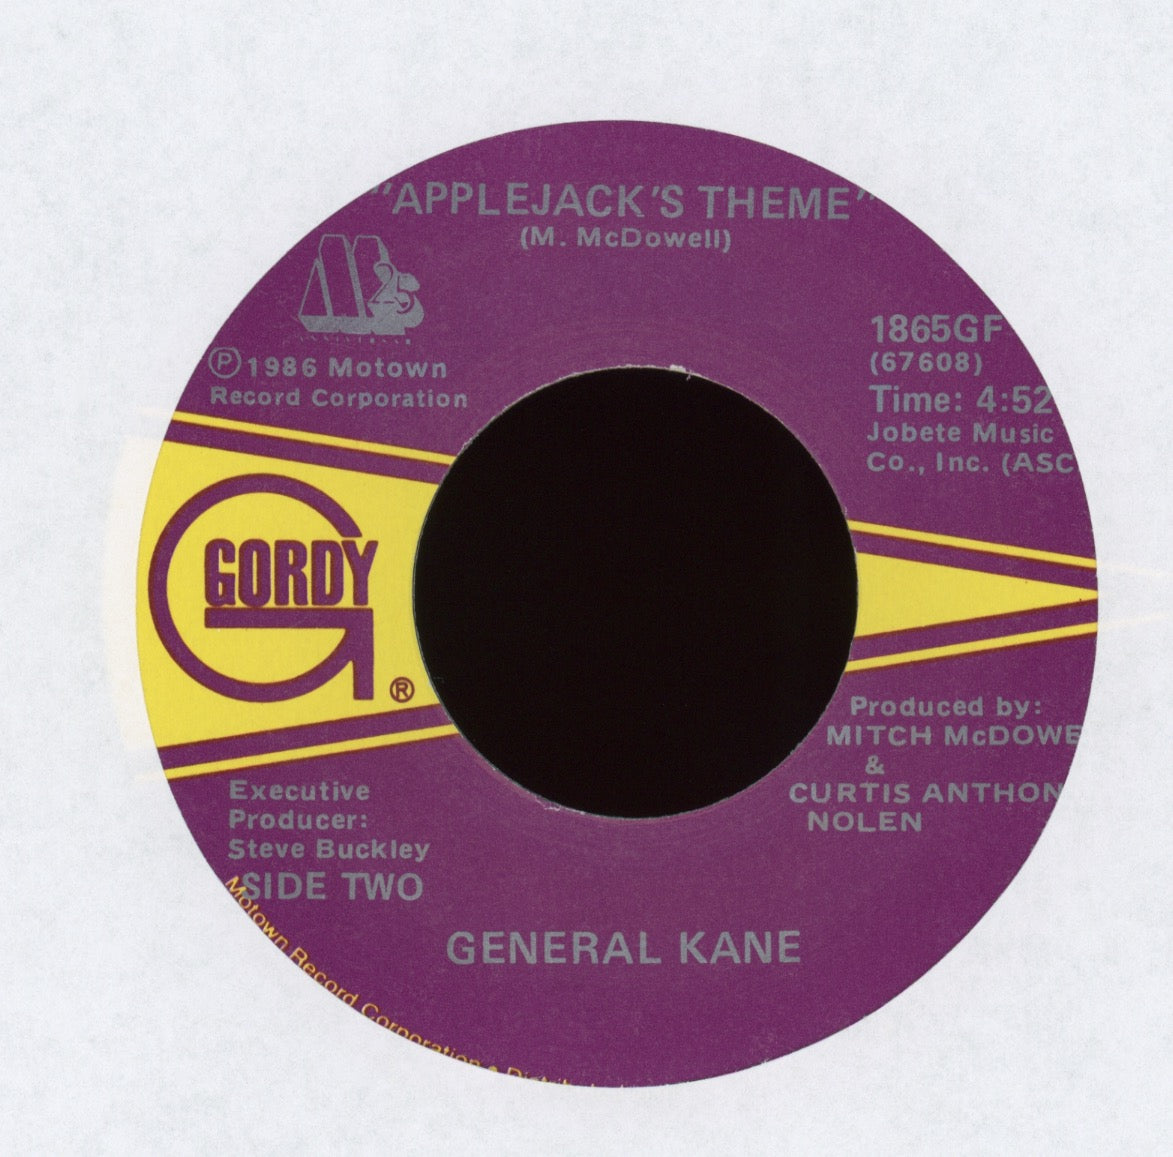 General Kane - Crack Killed Applejack on Gordy With Picture Sleeve